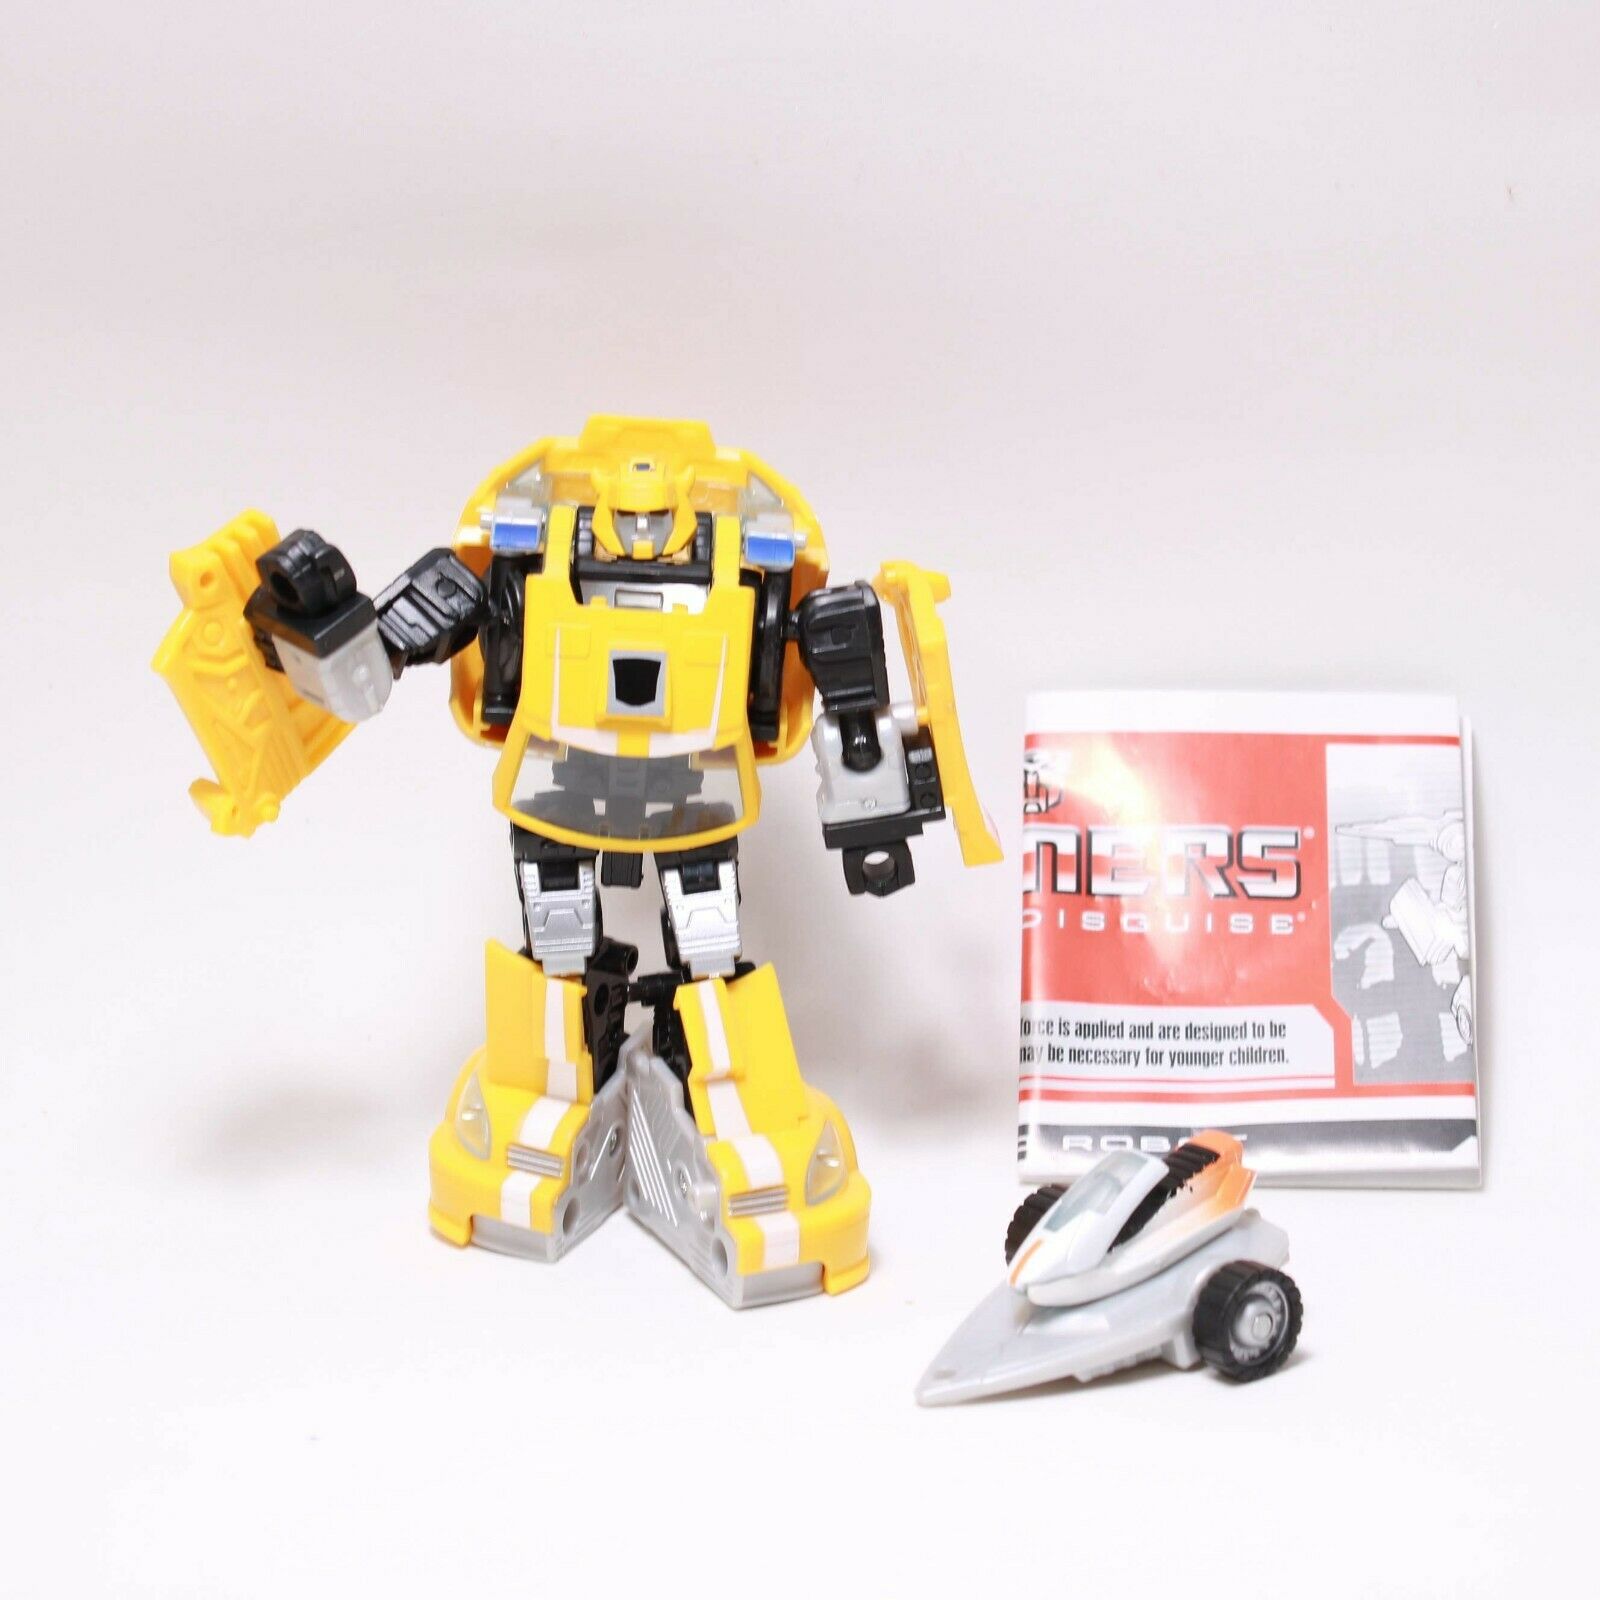 Transformers Classic Deluxe Bumblebee & Wave Crher Jetski 2006 100% Complete